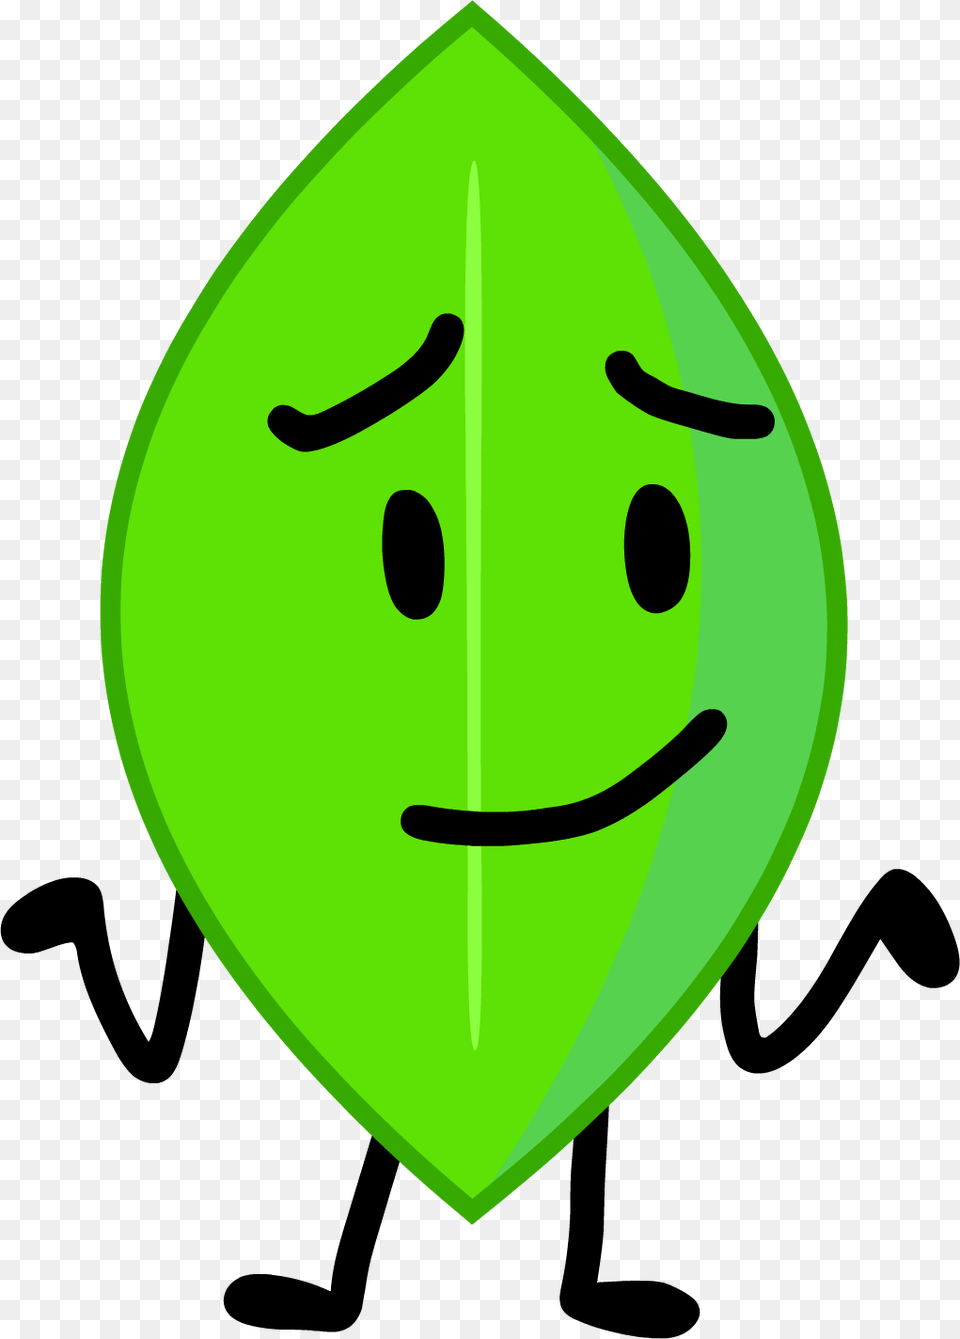 Battle For Dream Island Wiki Leafy Battle For Bfdi, Leaf, Plant, Green Png Image